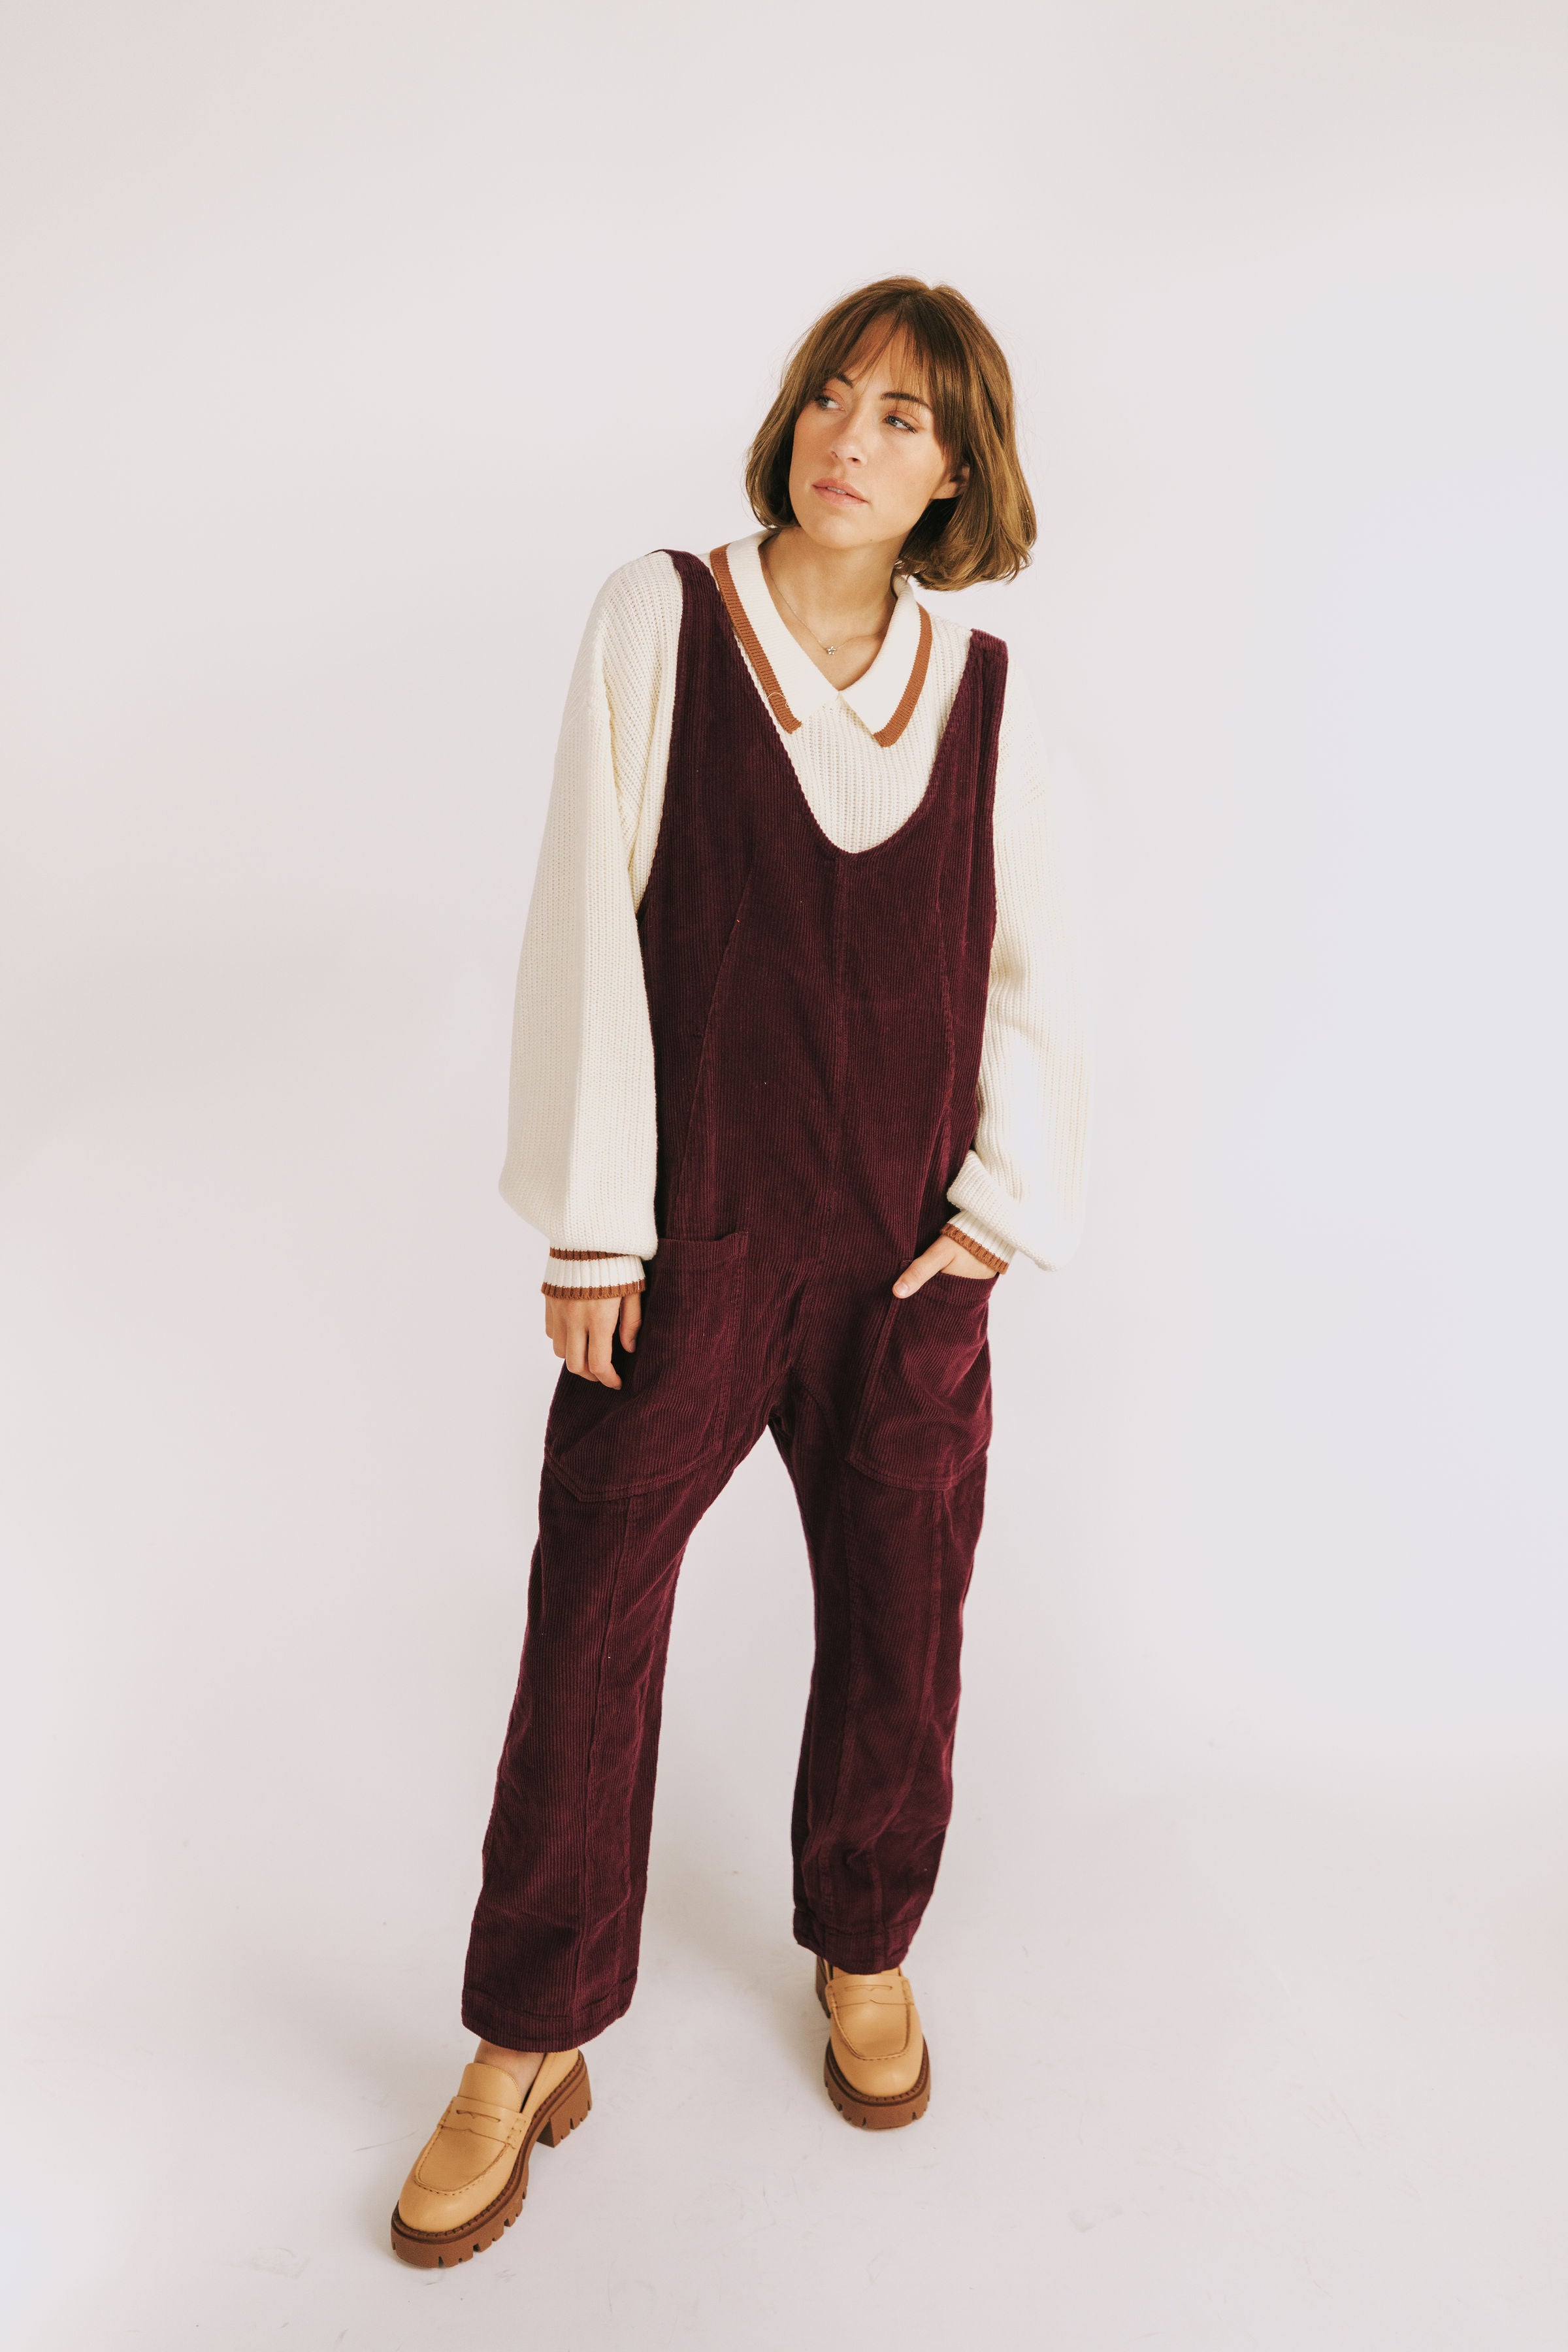 FREE PEOPLE - High Roller Cord Jumpsuit